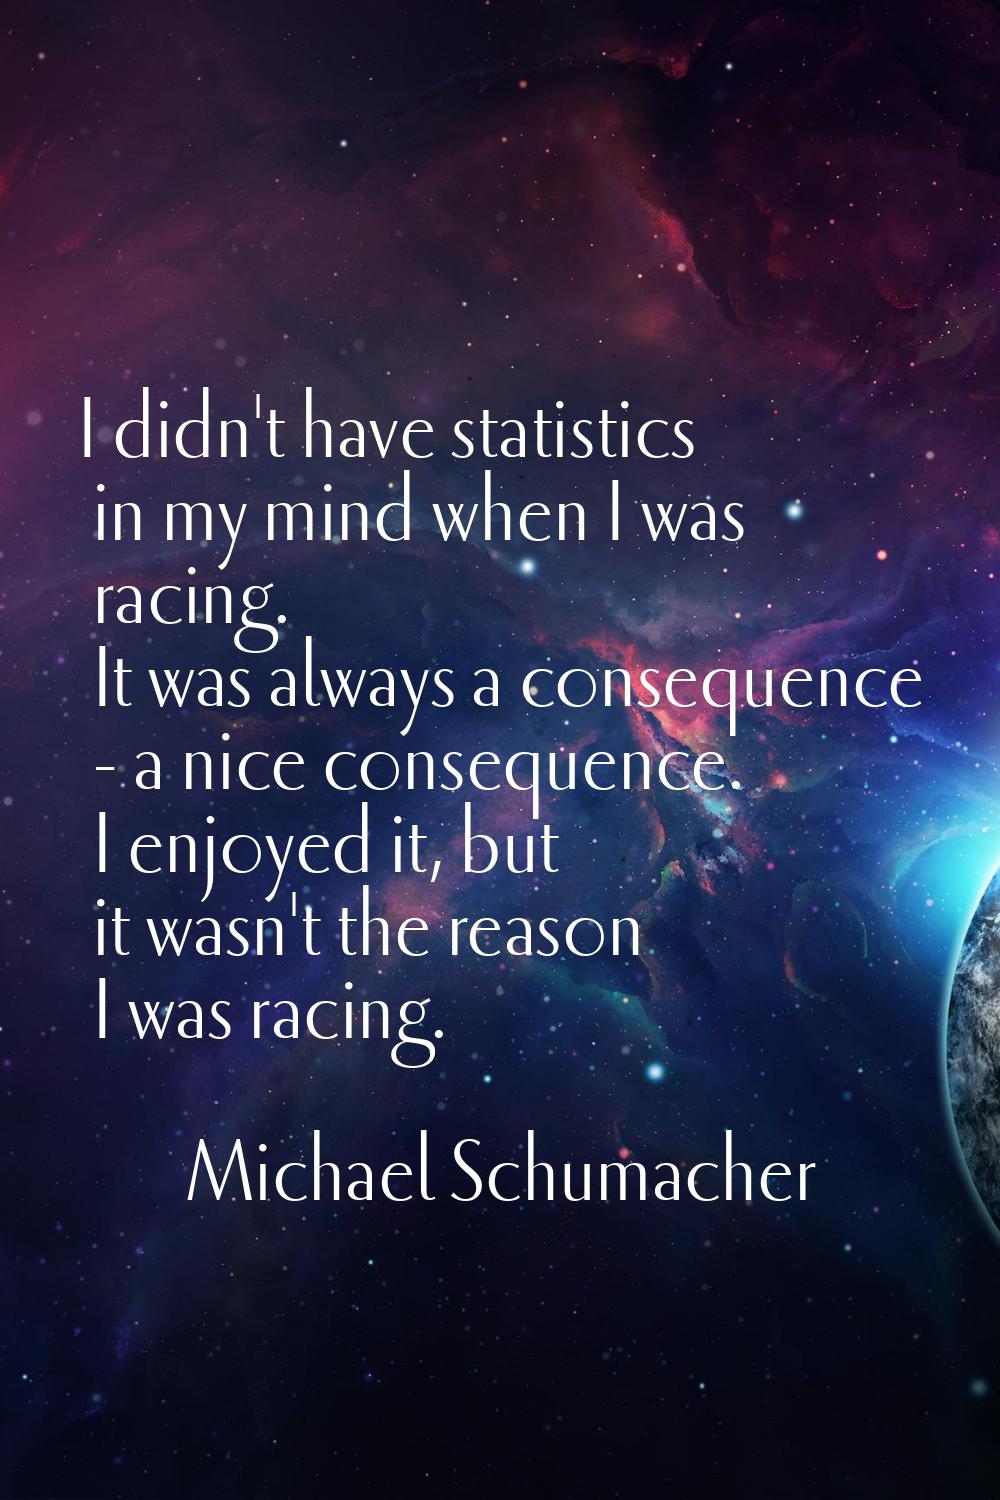 I didn't have statistics in my mind when I was racing. It was always a consequence - a nice consequ